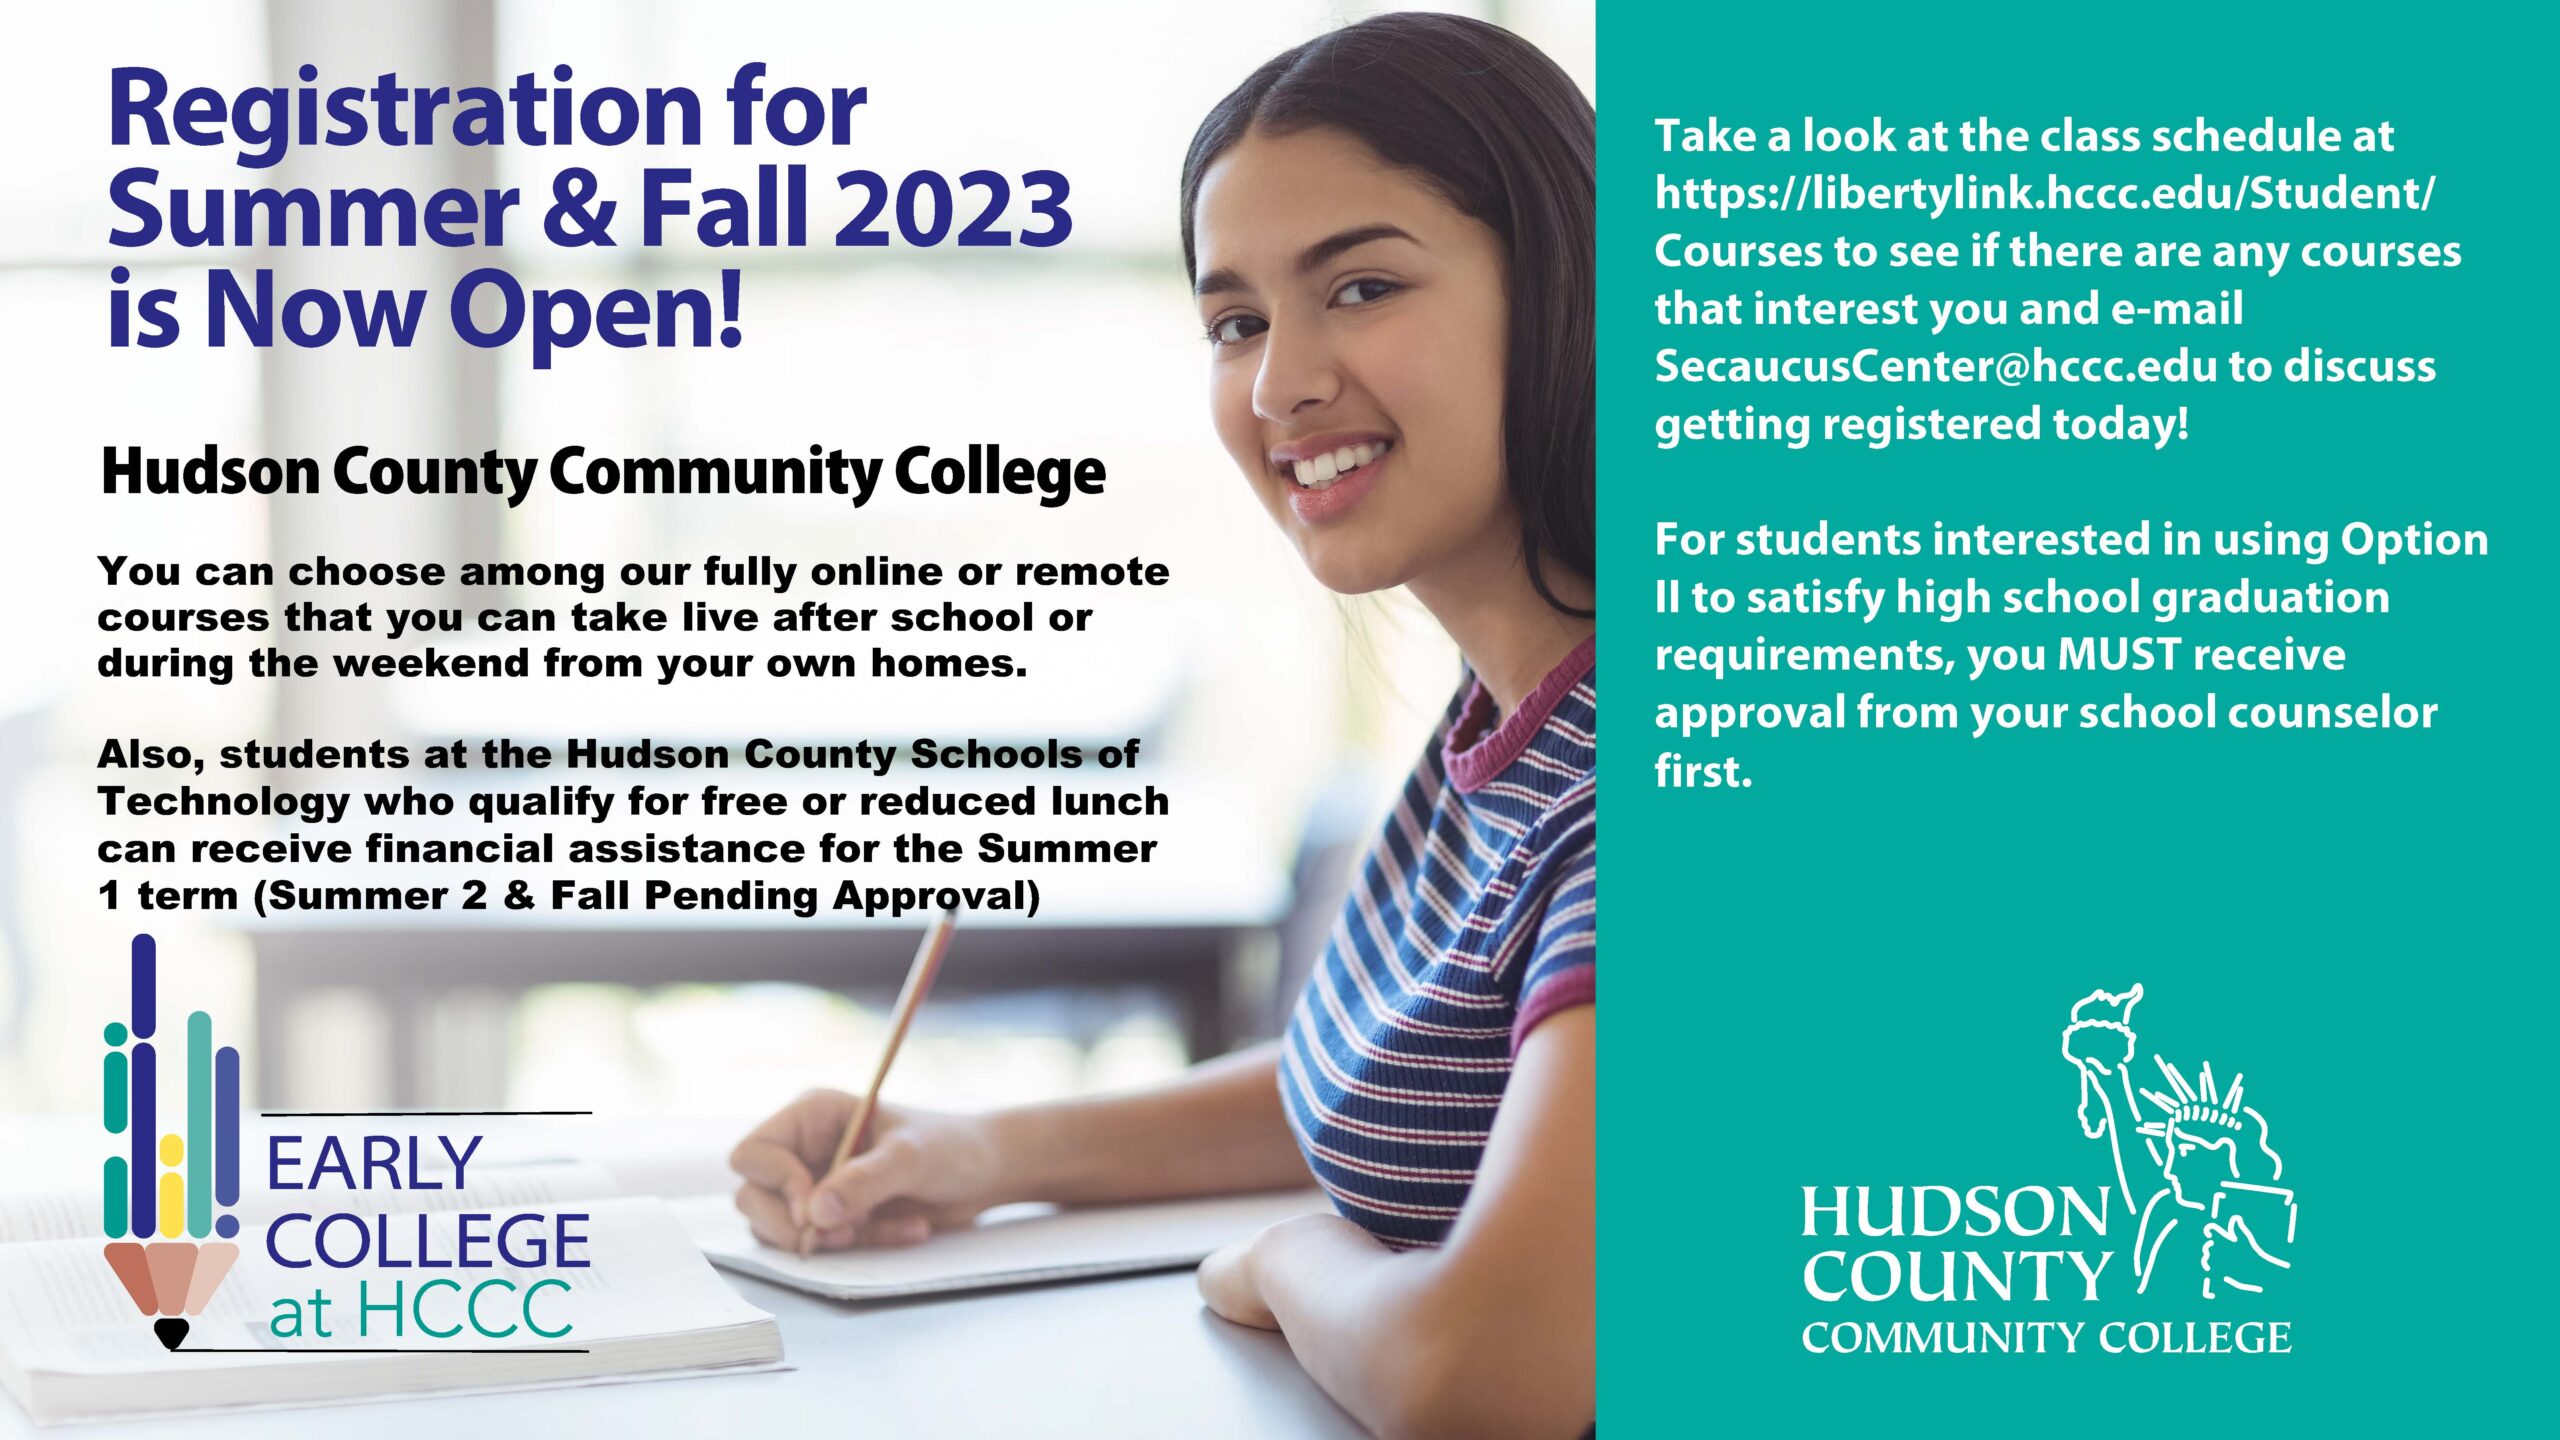 HCCC Summer and Fall 2023